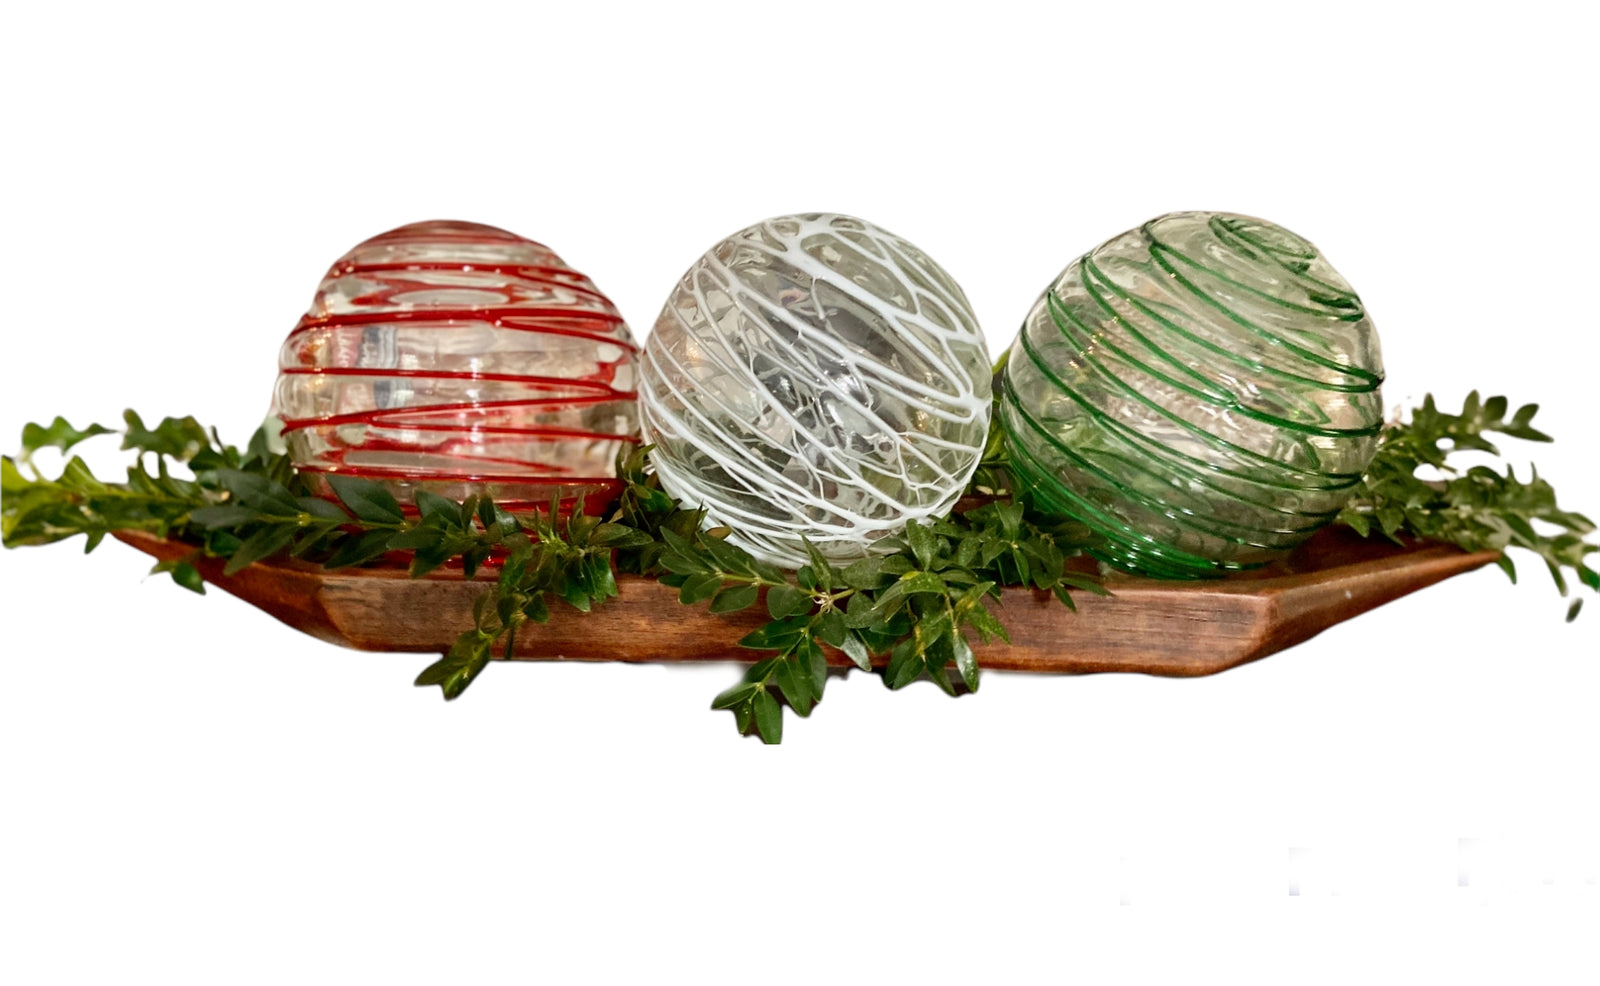 Glass Balls SPHERE SET/3-HOLIDAY THREADS - Worldly Goods Too